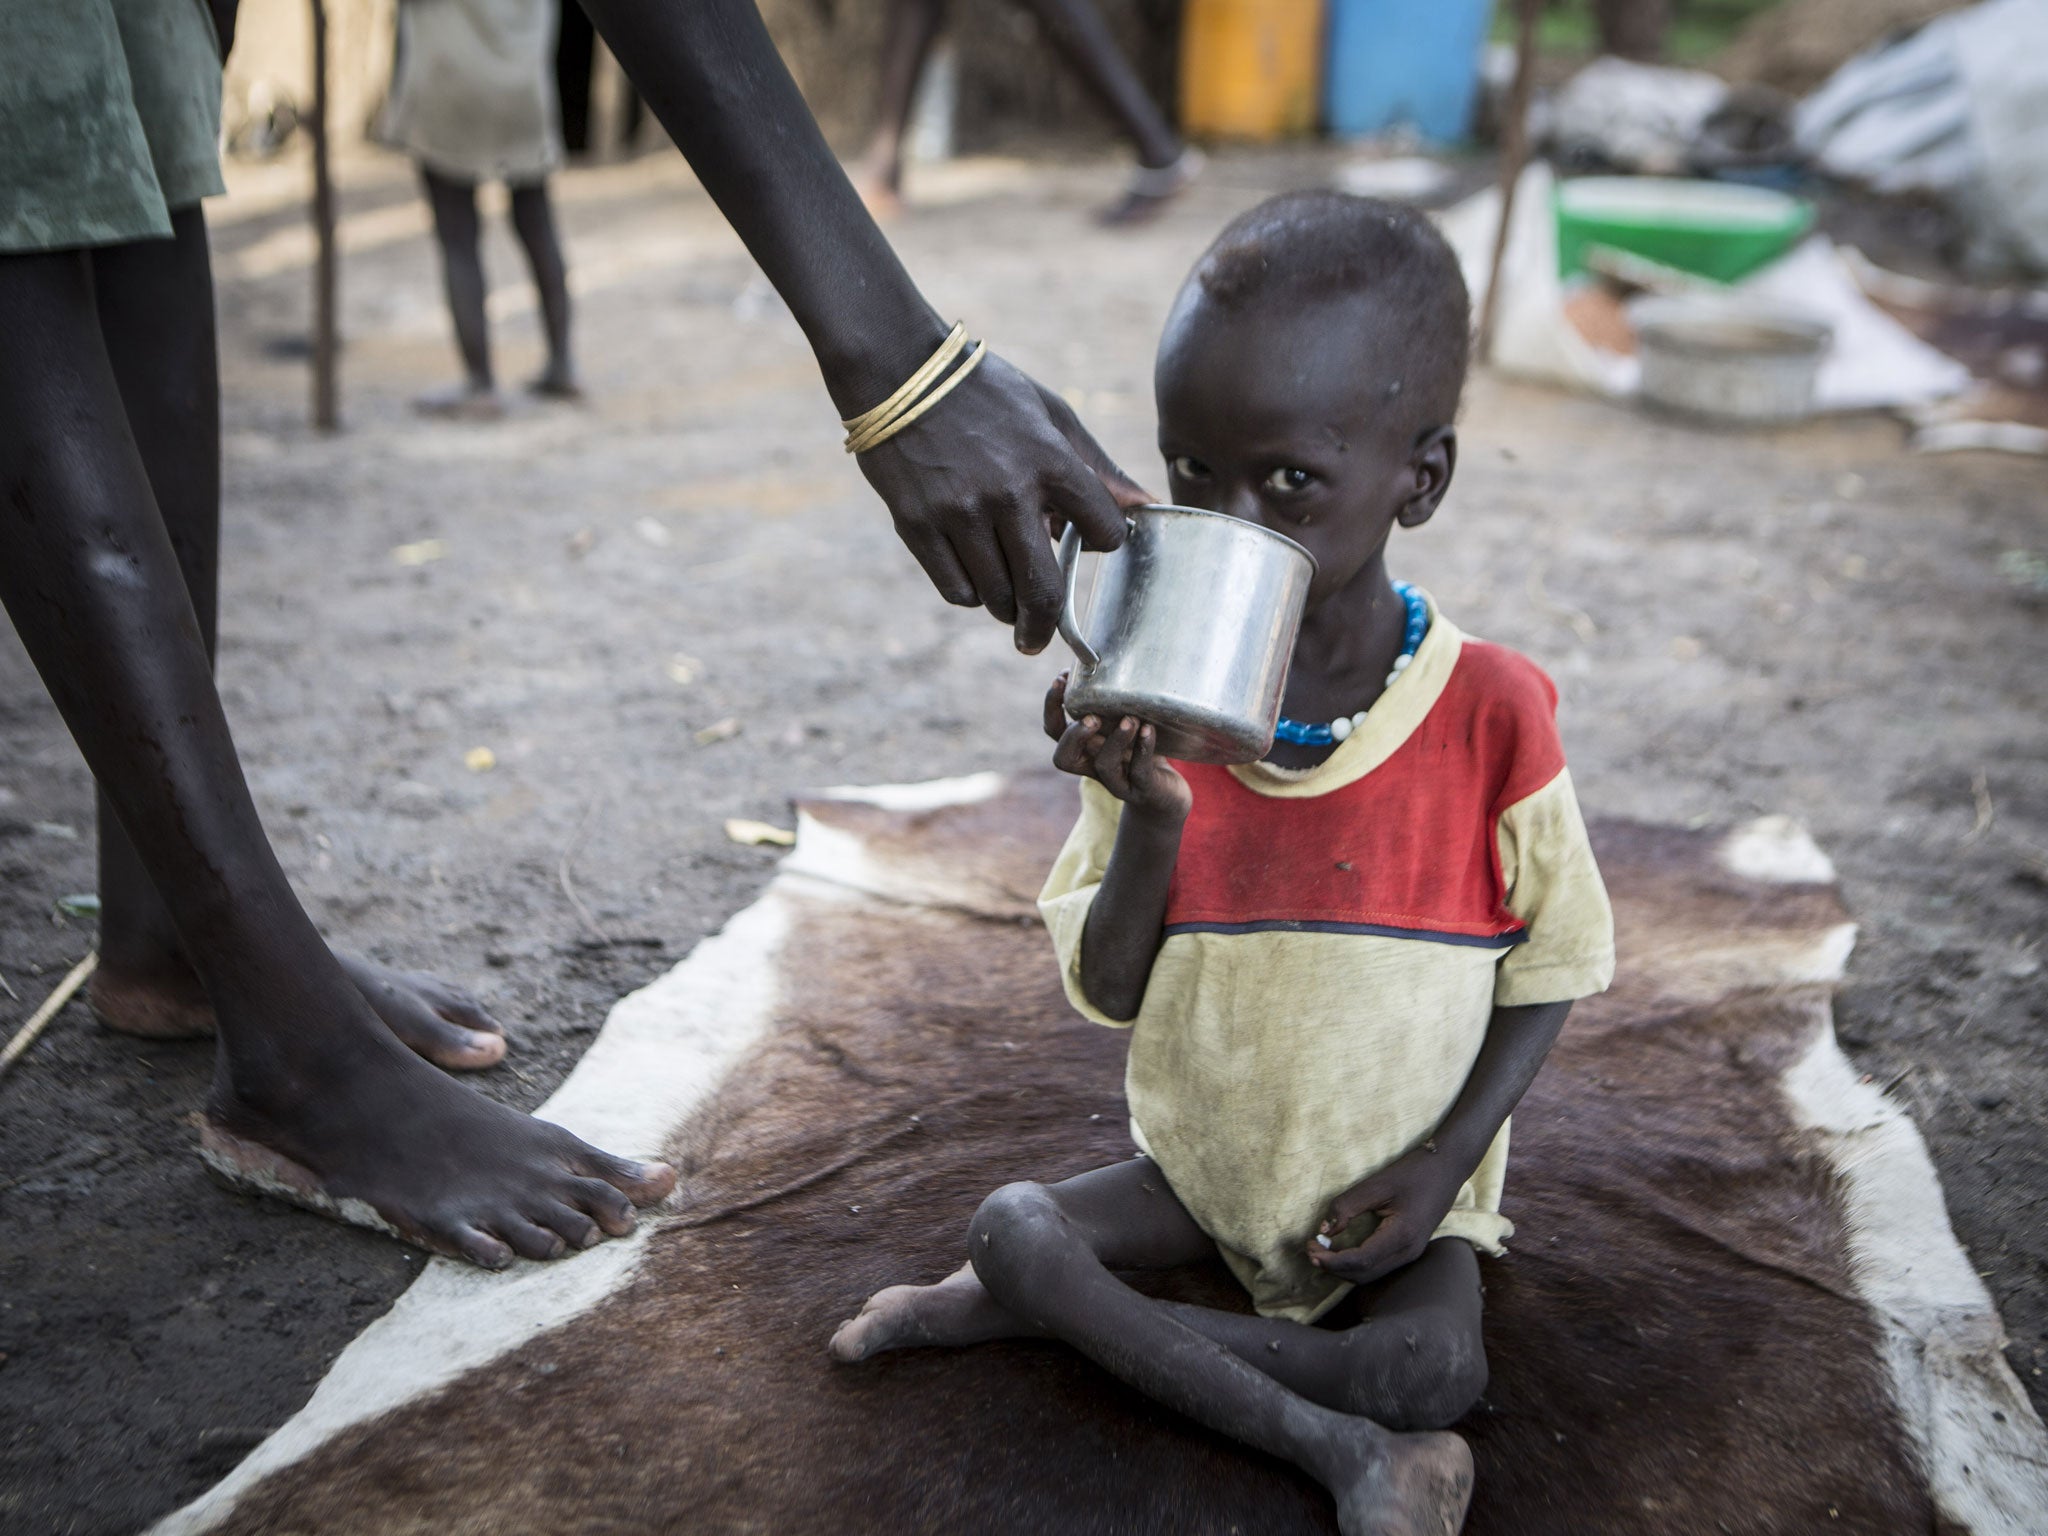 Nhial, 3, being given water by his mother. He is receiving treatment at the Akobo Save the Children feeding clinic in South Sudan.